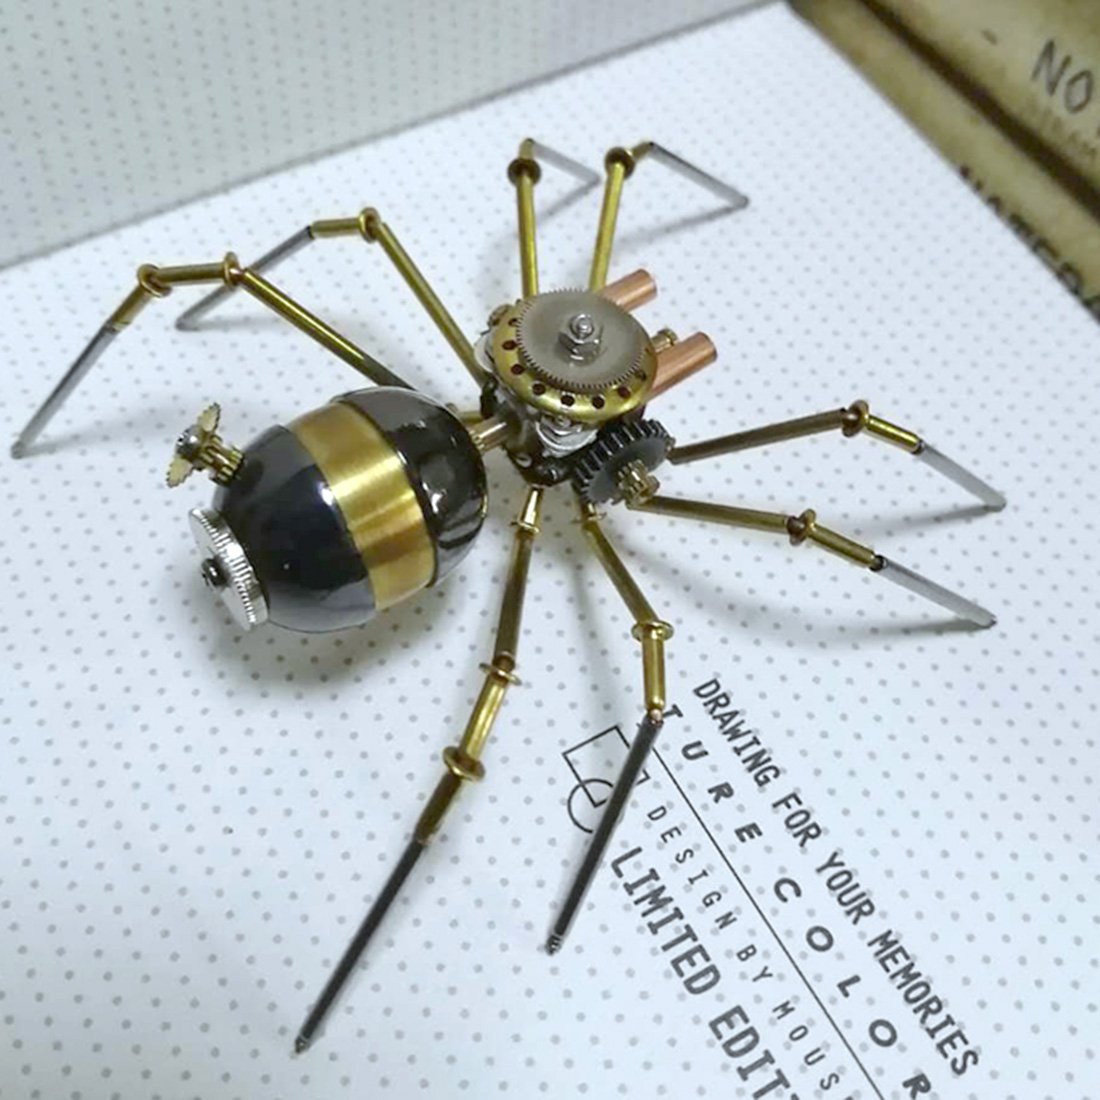 Steam Punk Metal Mechanical Little Wasp Spider Insects Model Crafts Collection